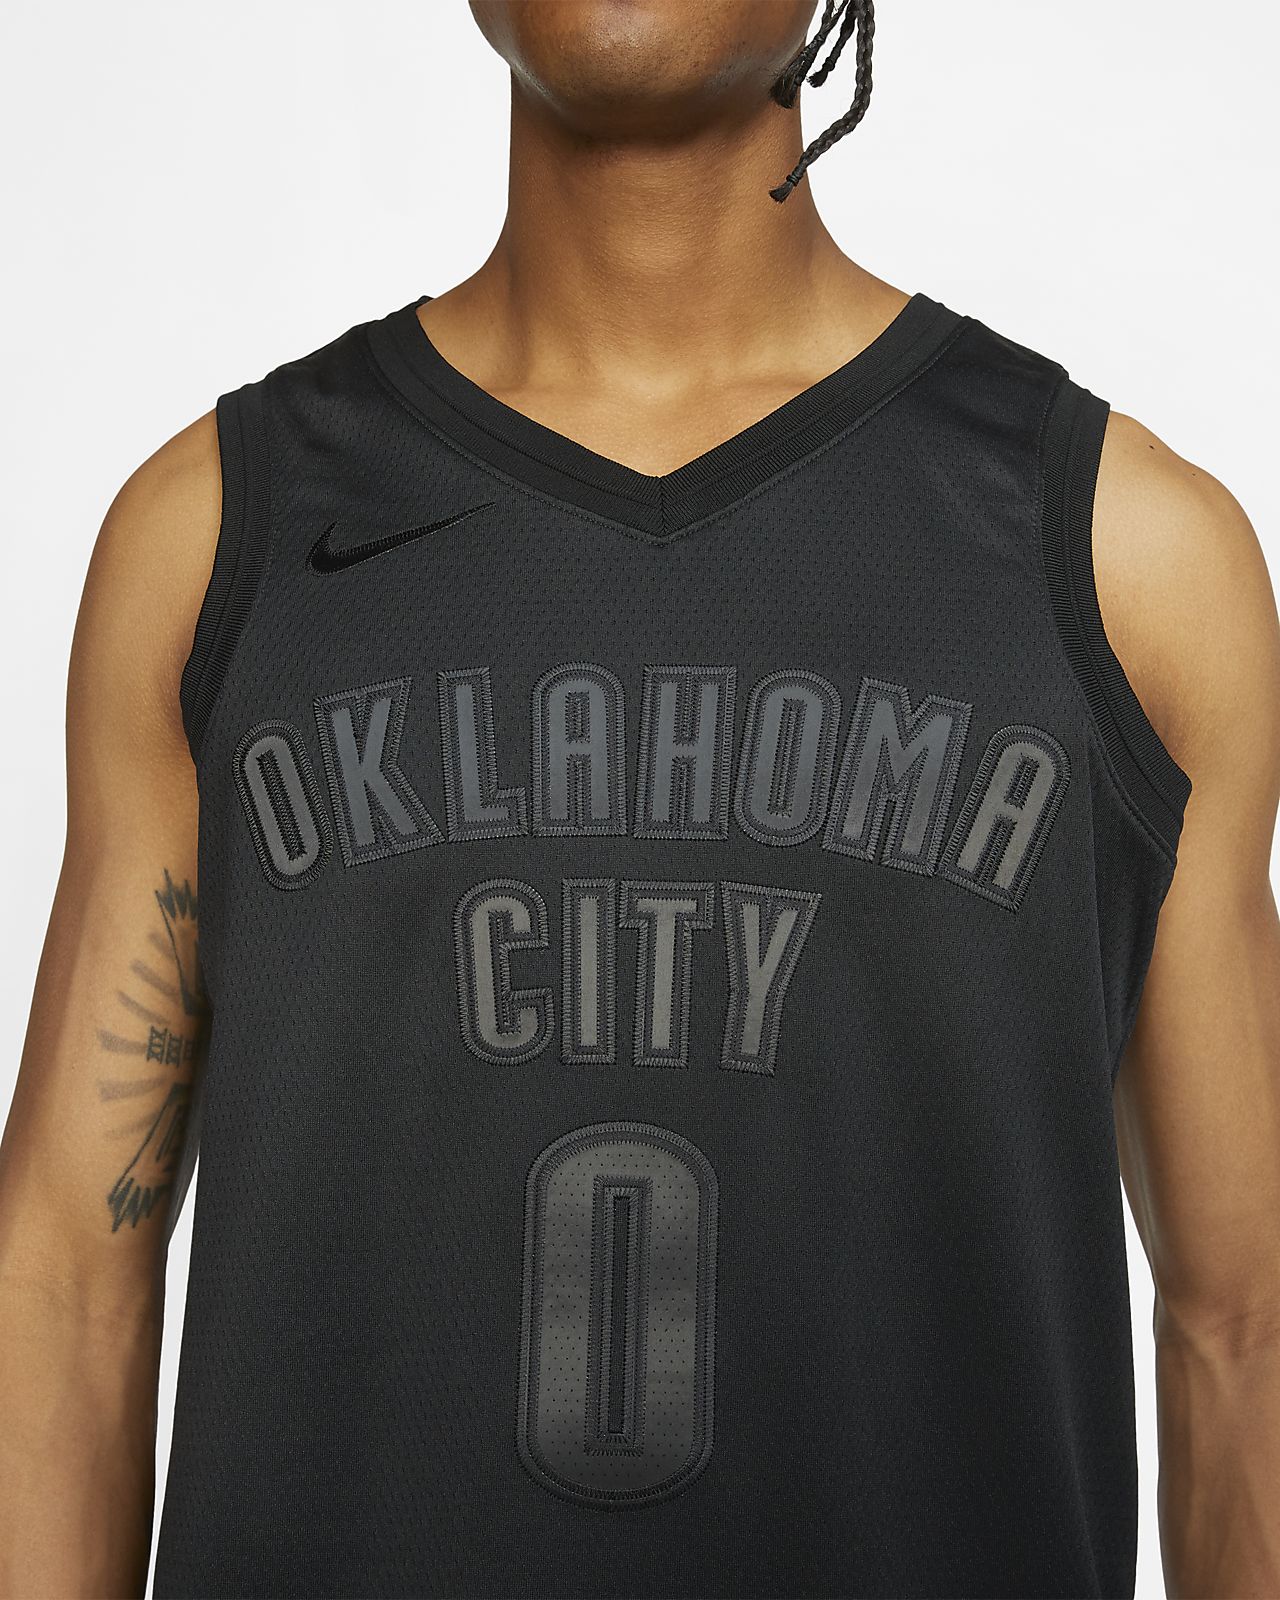 russell westbrook jersey adult small